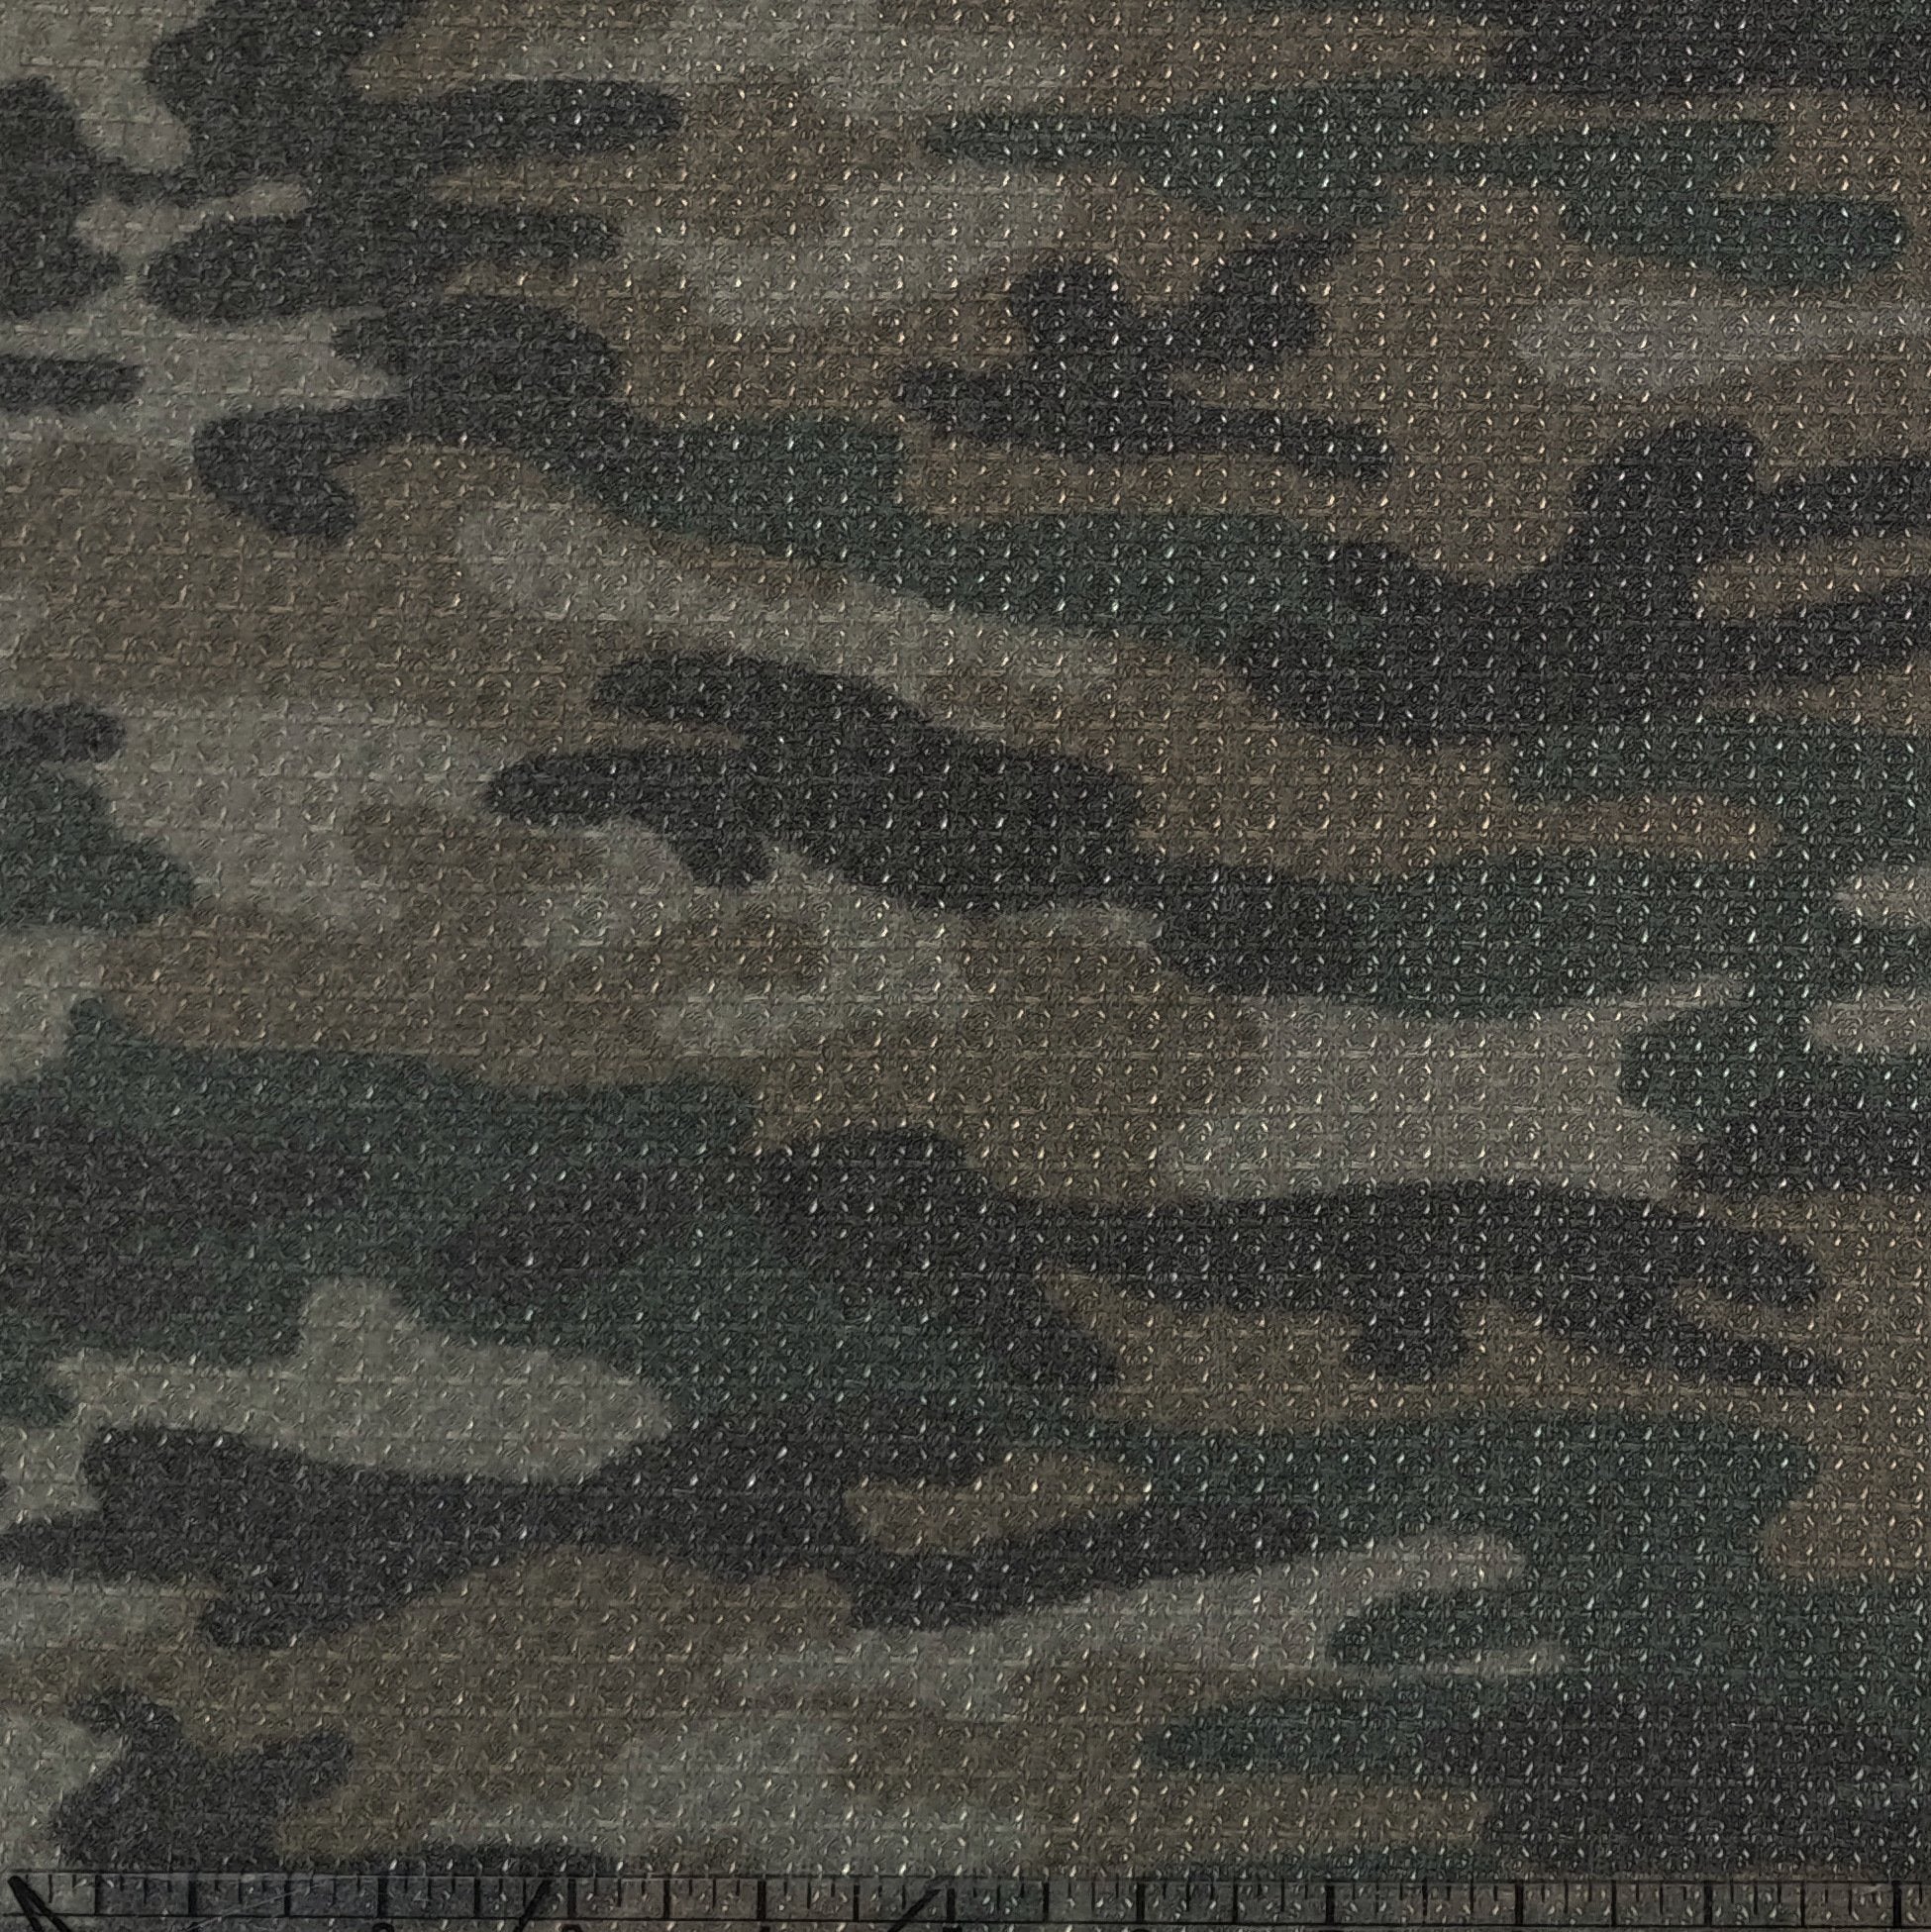 Hunter Green Brown and Charcoal Camouflage Waffle Knit Fabric Fabric, Raspberry Creek Fabrics, watermarked, restored